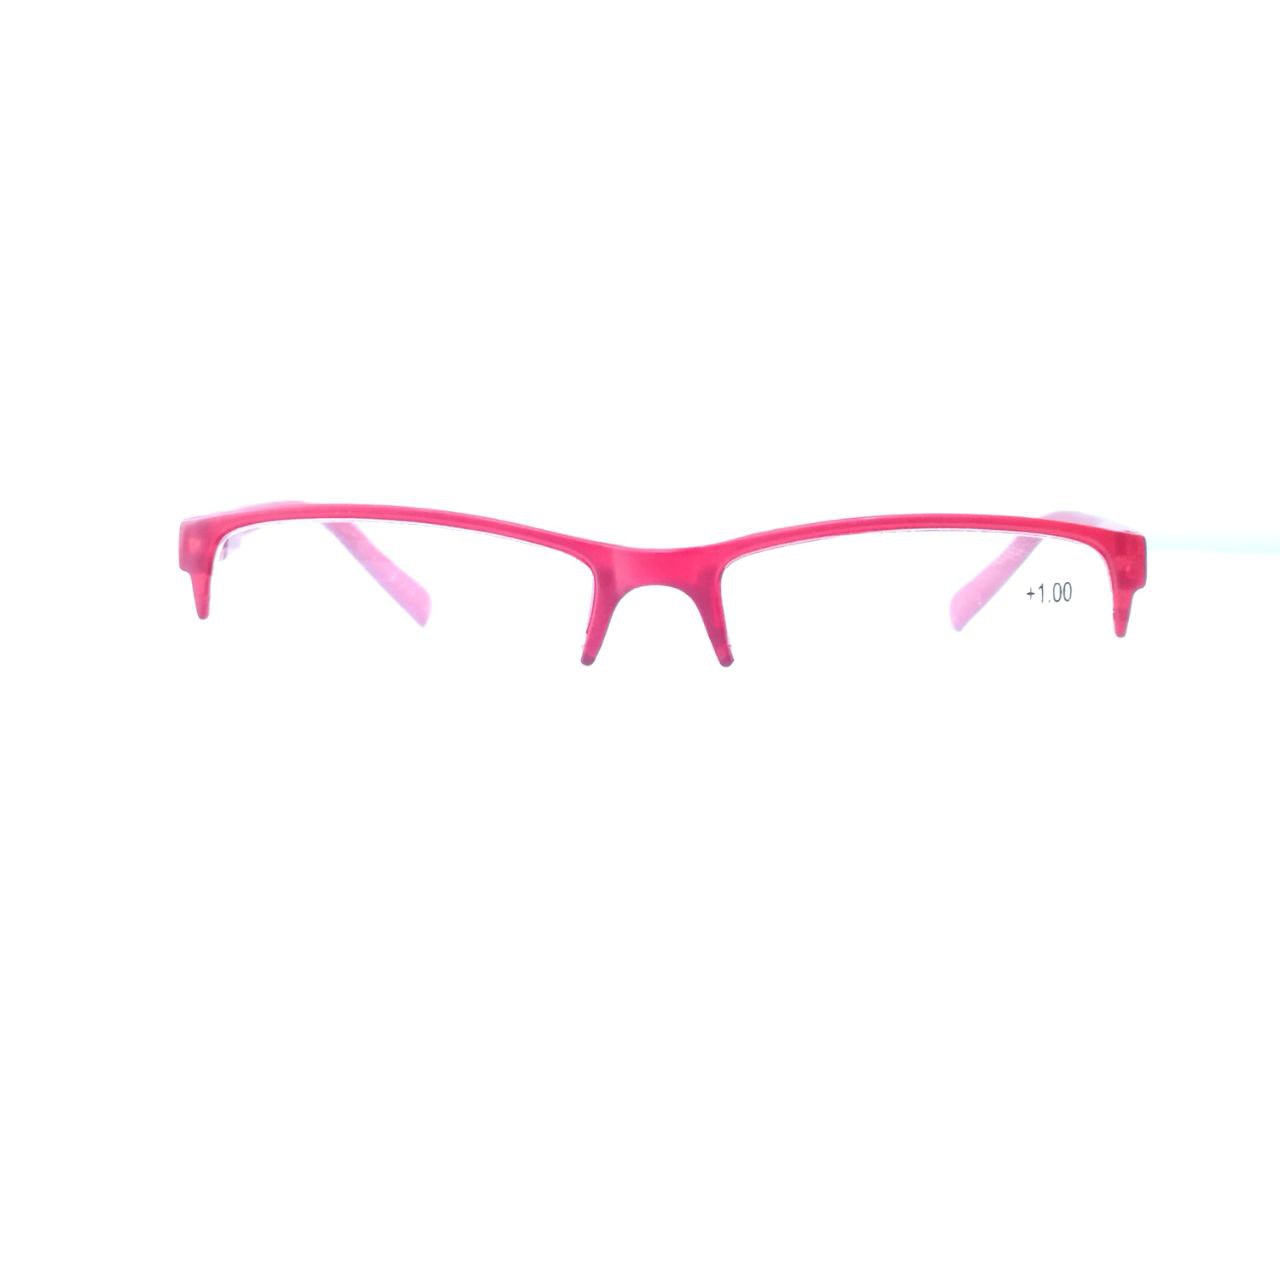 Stylish Supra Reading Glasses in Red Color for Men and Women with +1.00 Power